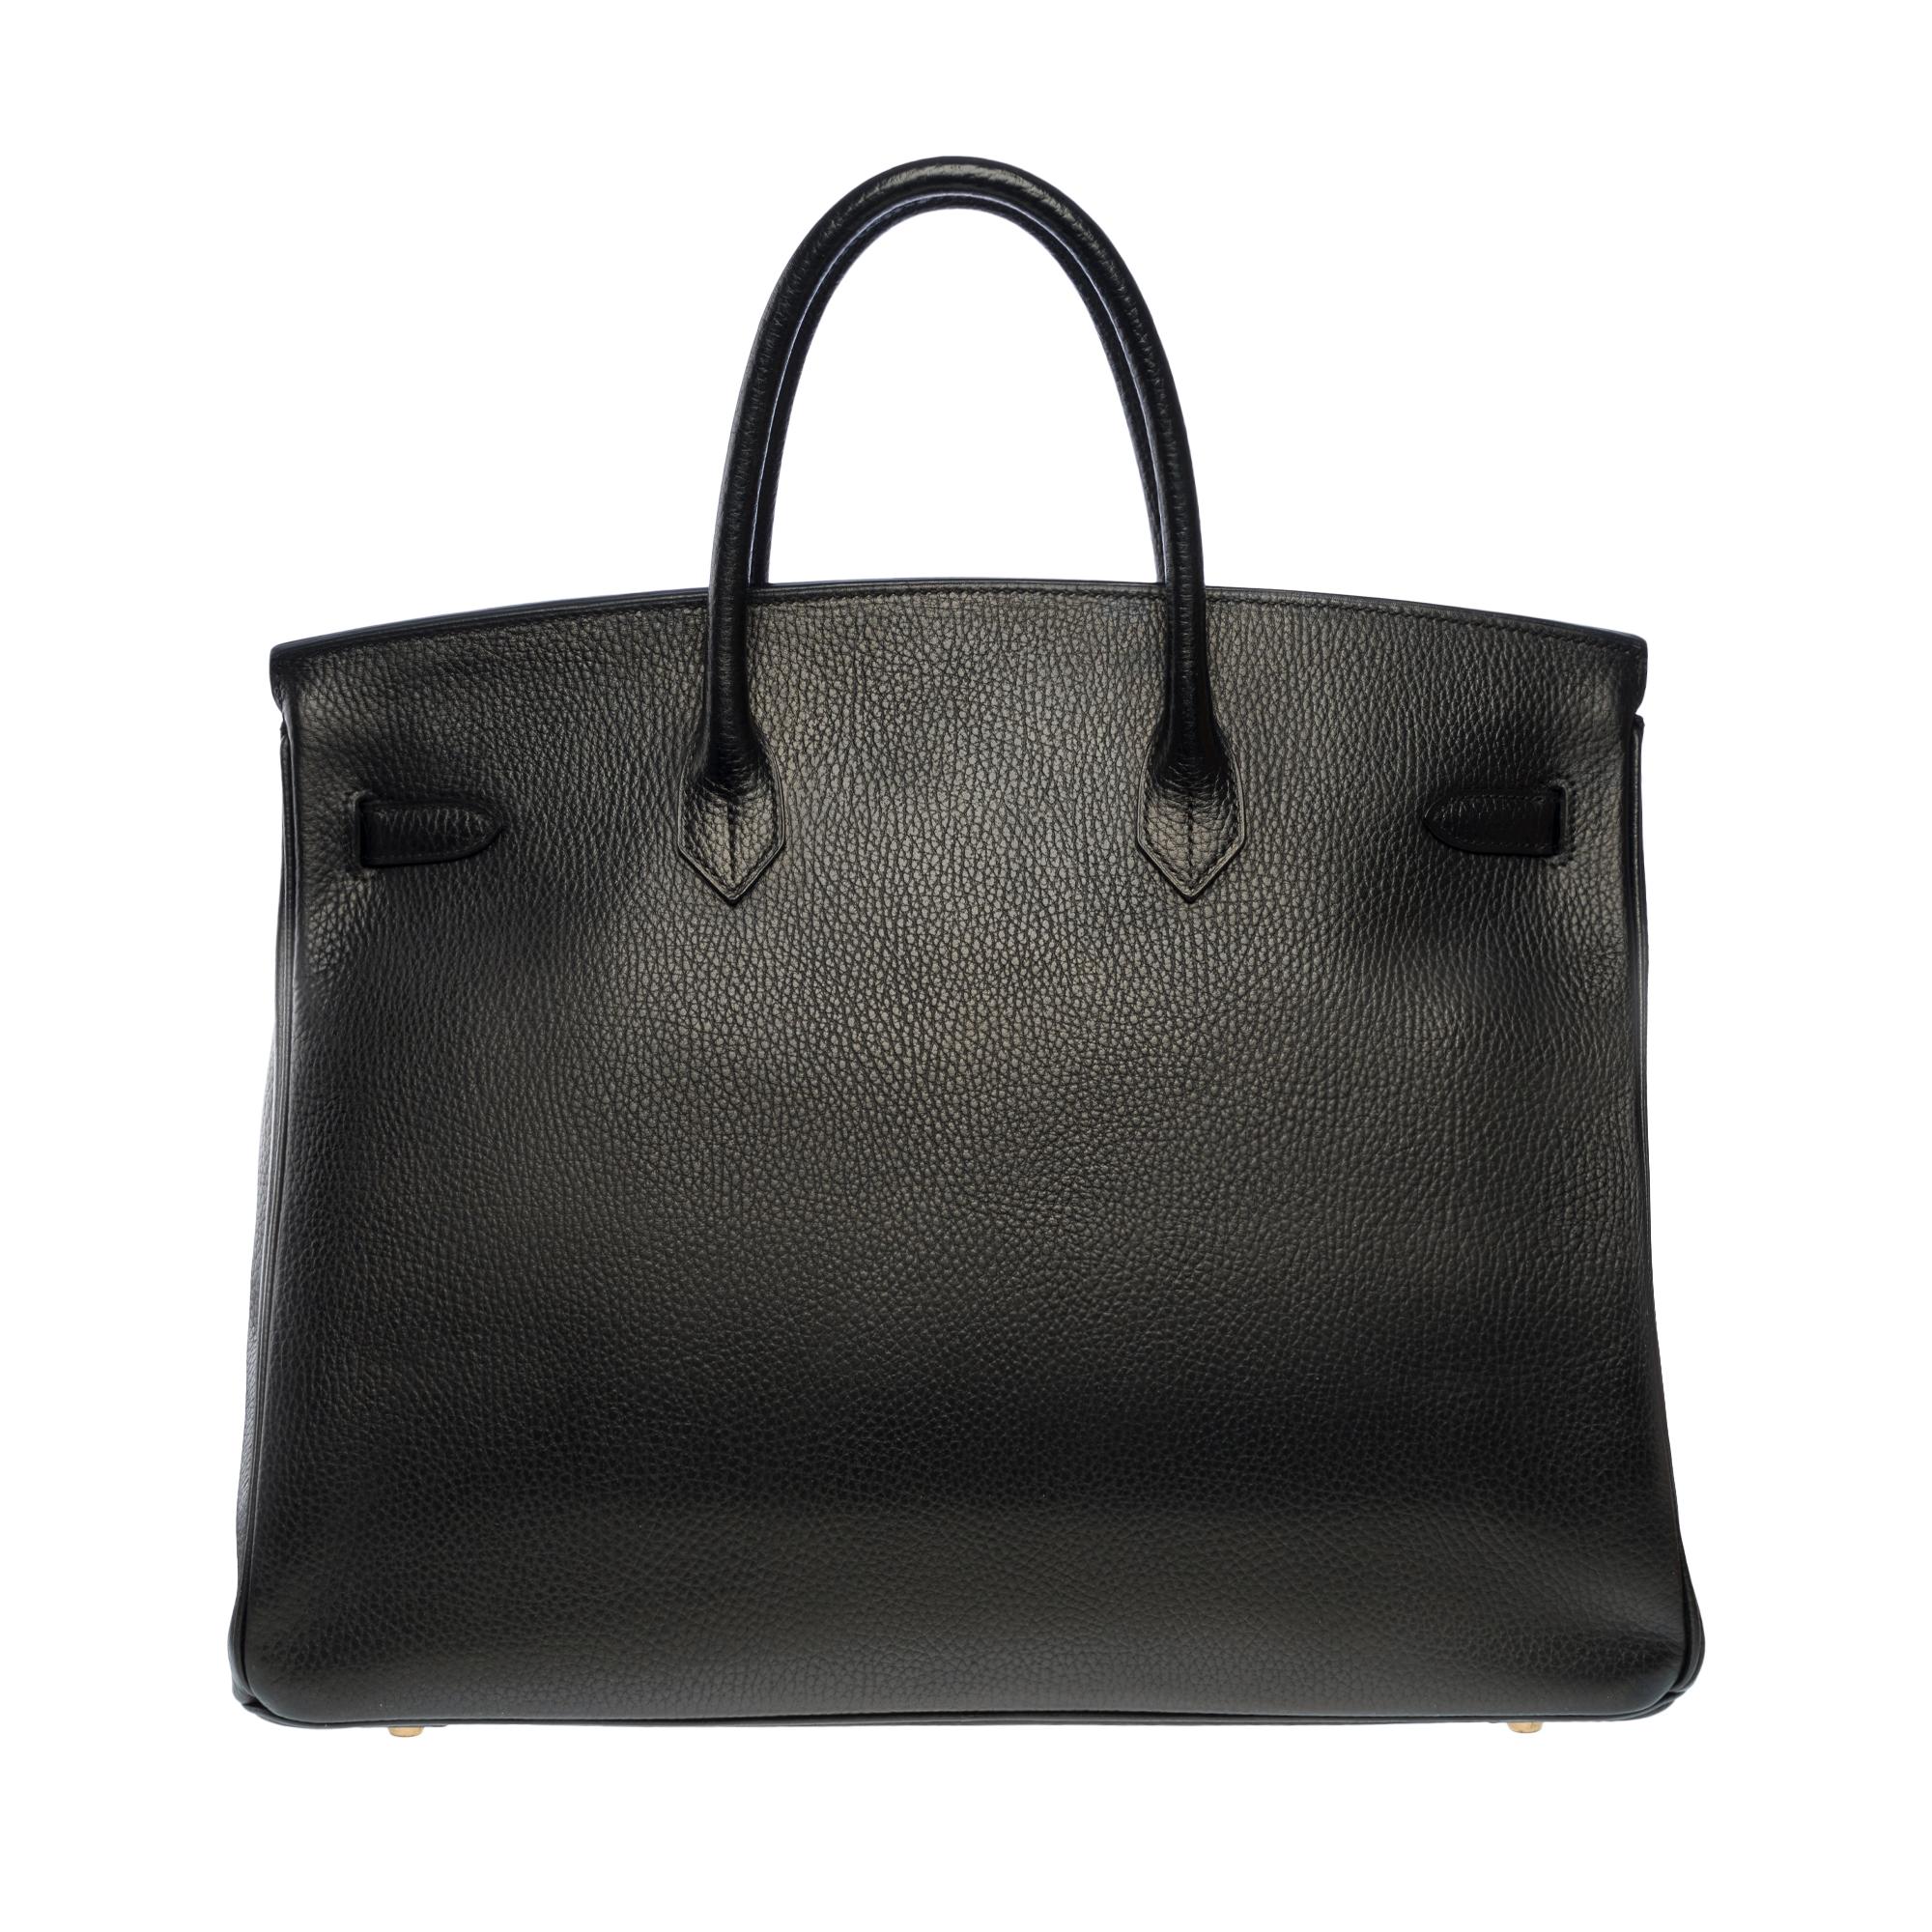 Beautiful Hermes Birkin 40 cm handbag in black Fjord leather, gold-plated metal hardware, double black leather handle for a hand carry

Flap closure
Black leather inner lining, one zipped pocket, one patch pocket
Signature: 